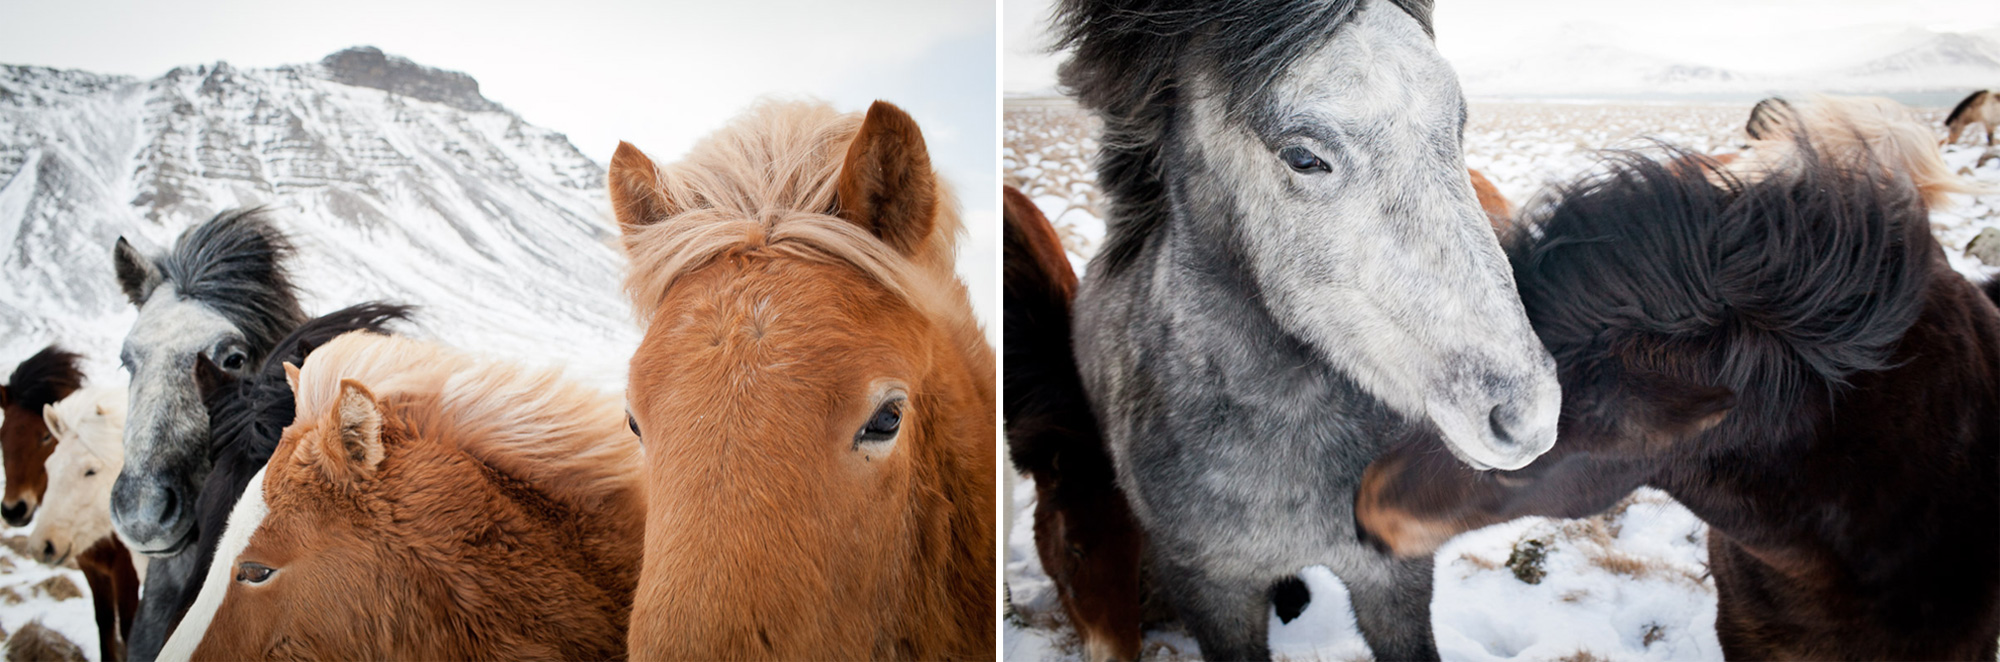 Ponies nuzzle during winter in Iceland. Travel photography by Monica Donovan